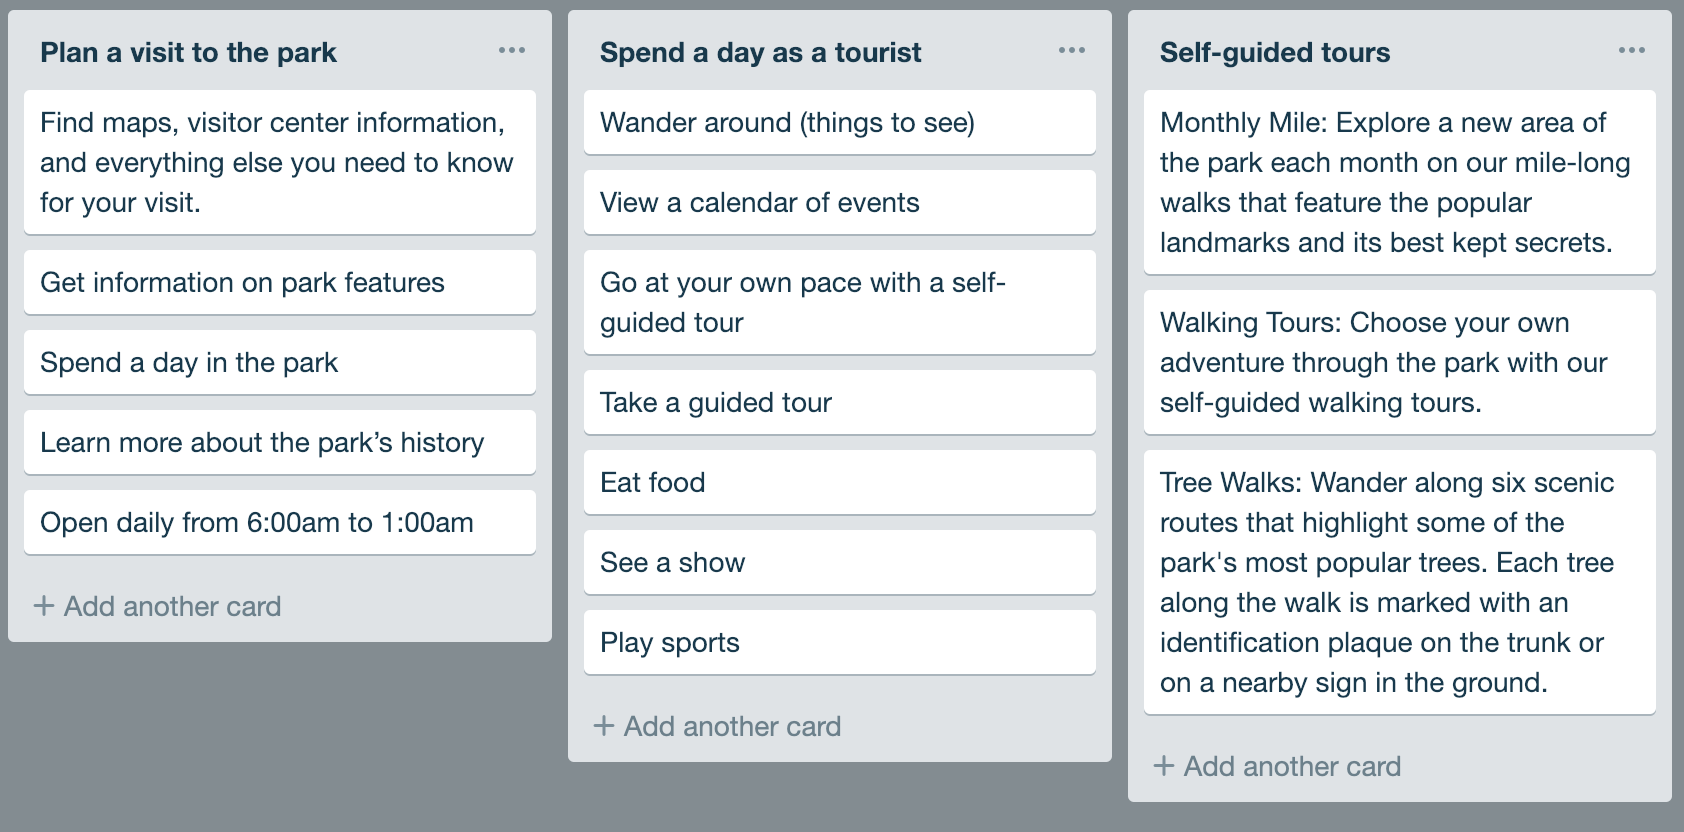 a testing board with columns for plan a visit, spend the day as a tourist, and self-guided tours